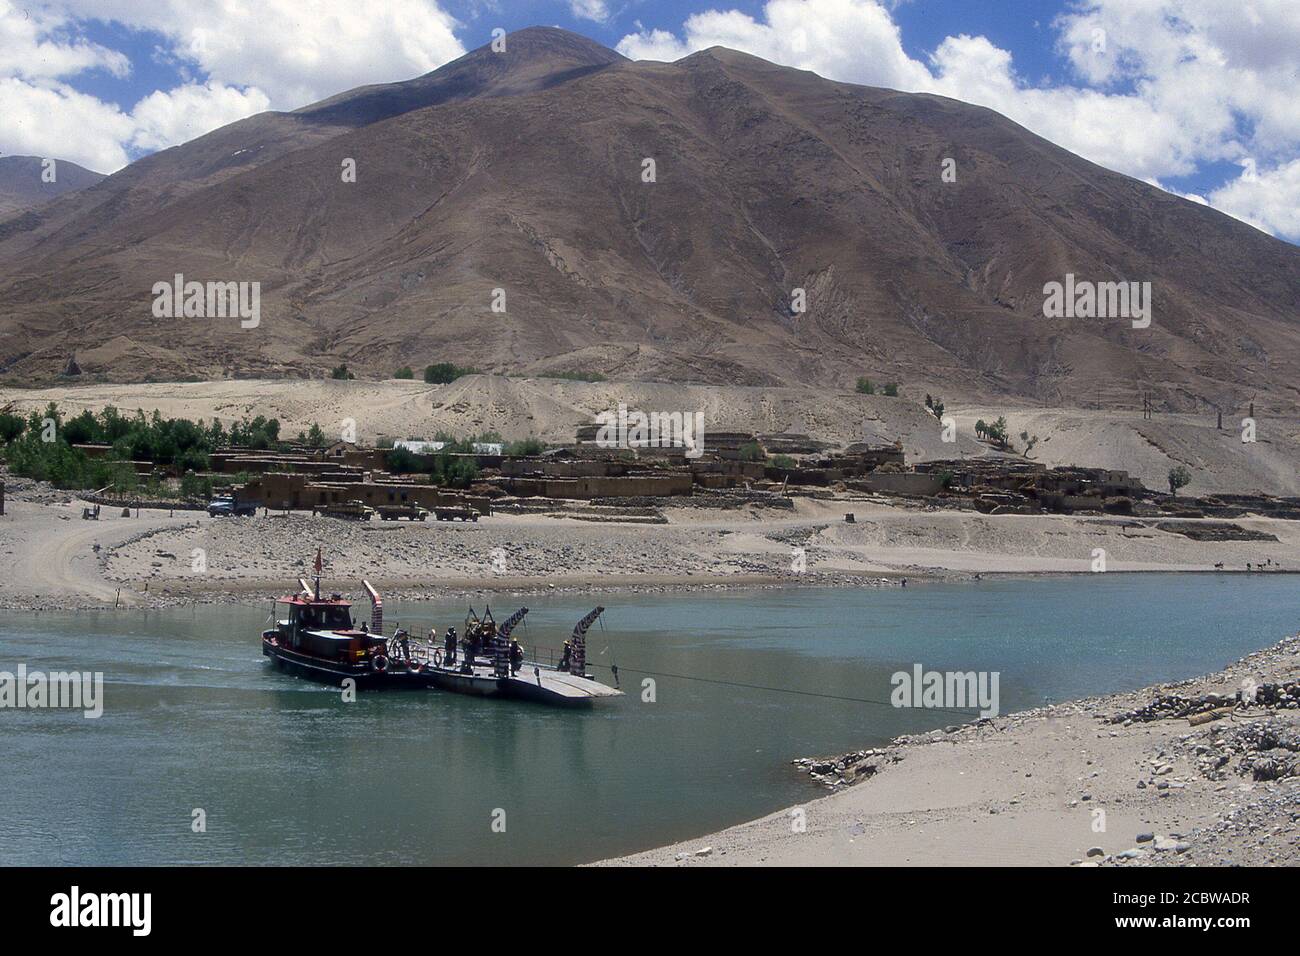 TIBET - FERRY CROSSING THE YARLUNG TSAMPO RIVER AT DATSUKHAR. Stock Photo